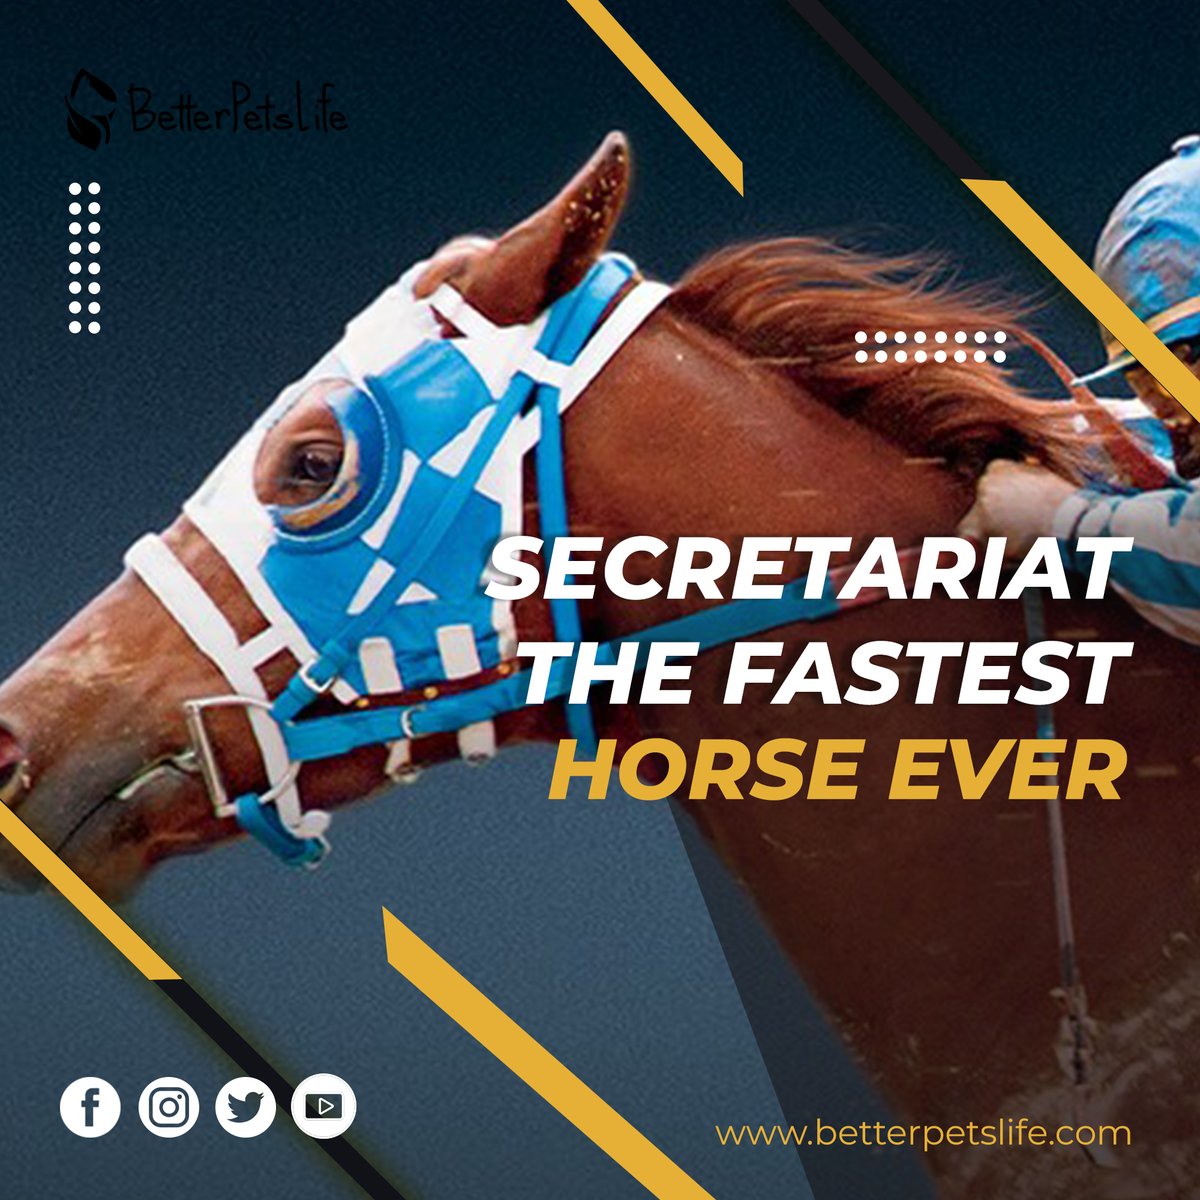 Secretariat holds the title of the world's fastest horse. In 1973, he set a record time of 1 minute and 59.40 seconds in the Kentucky Derby, a record still unbeaten. 
Betterpetslife.com

#horse #horselovers #horselover #pethorse #petlovers #MondayMood #MondayMotivation